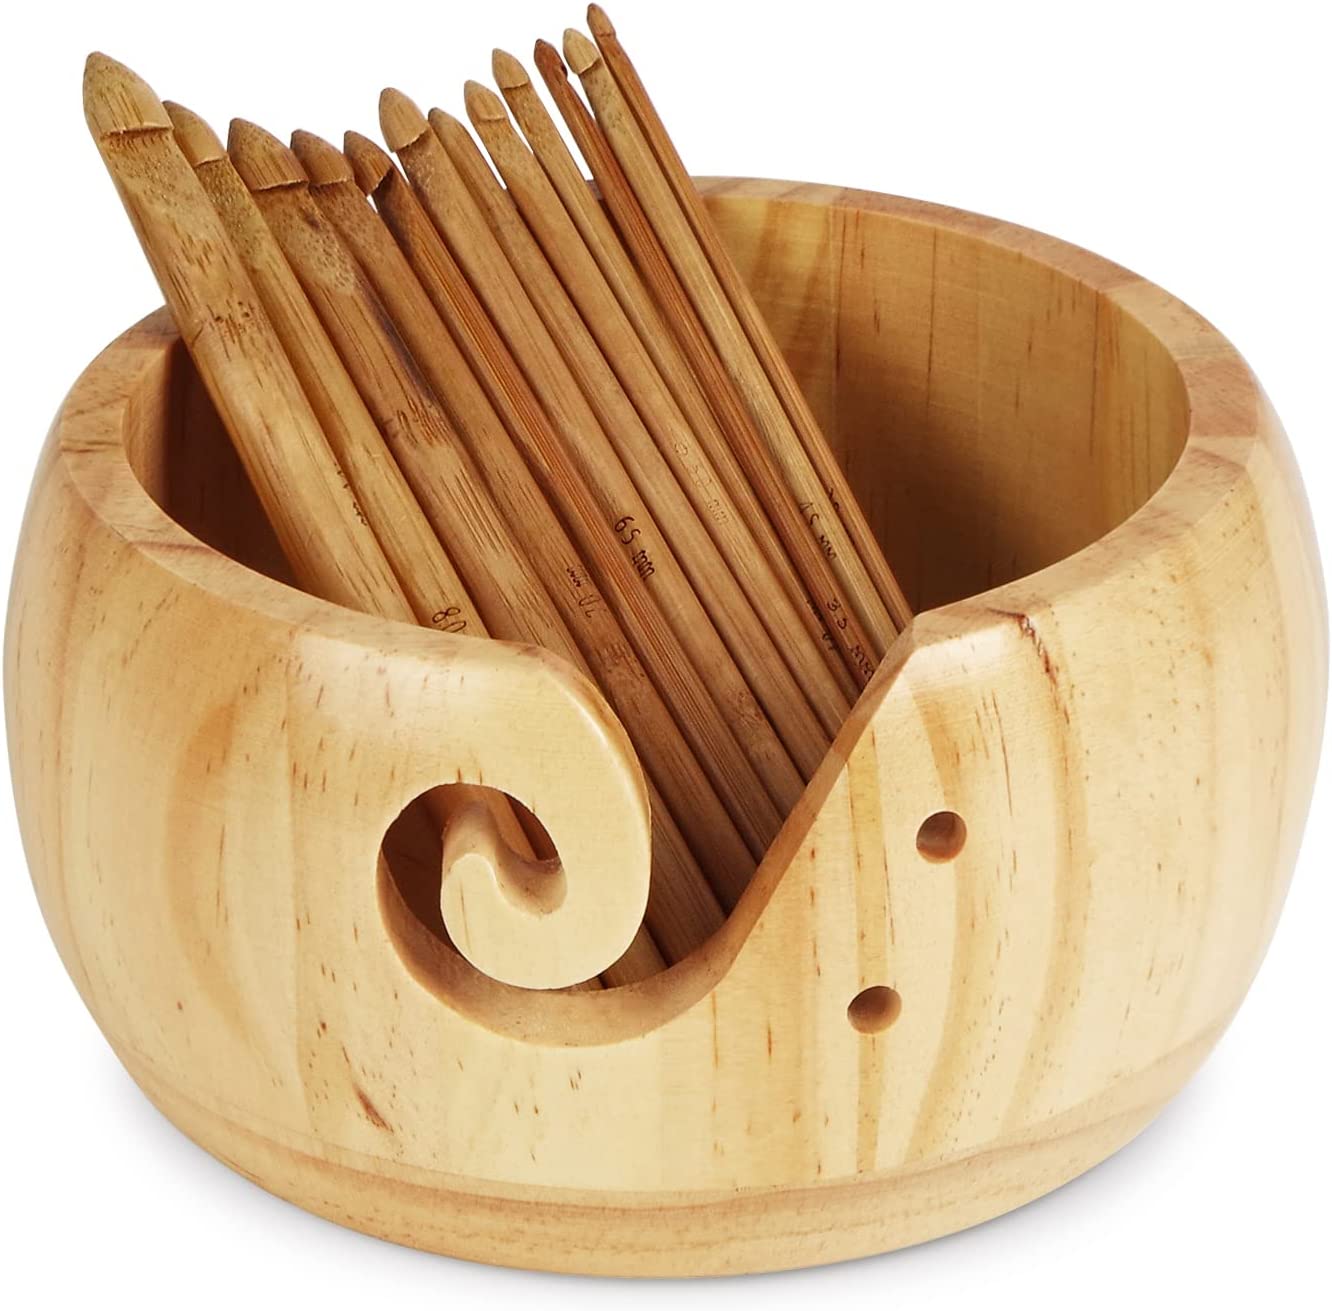 Premium Yarn Bowl Storage with Crochet Hooks Wooden | Classic Yarn bowl for Knitting and Crochet Hooks set | Knitting & Crochet Accessories